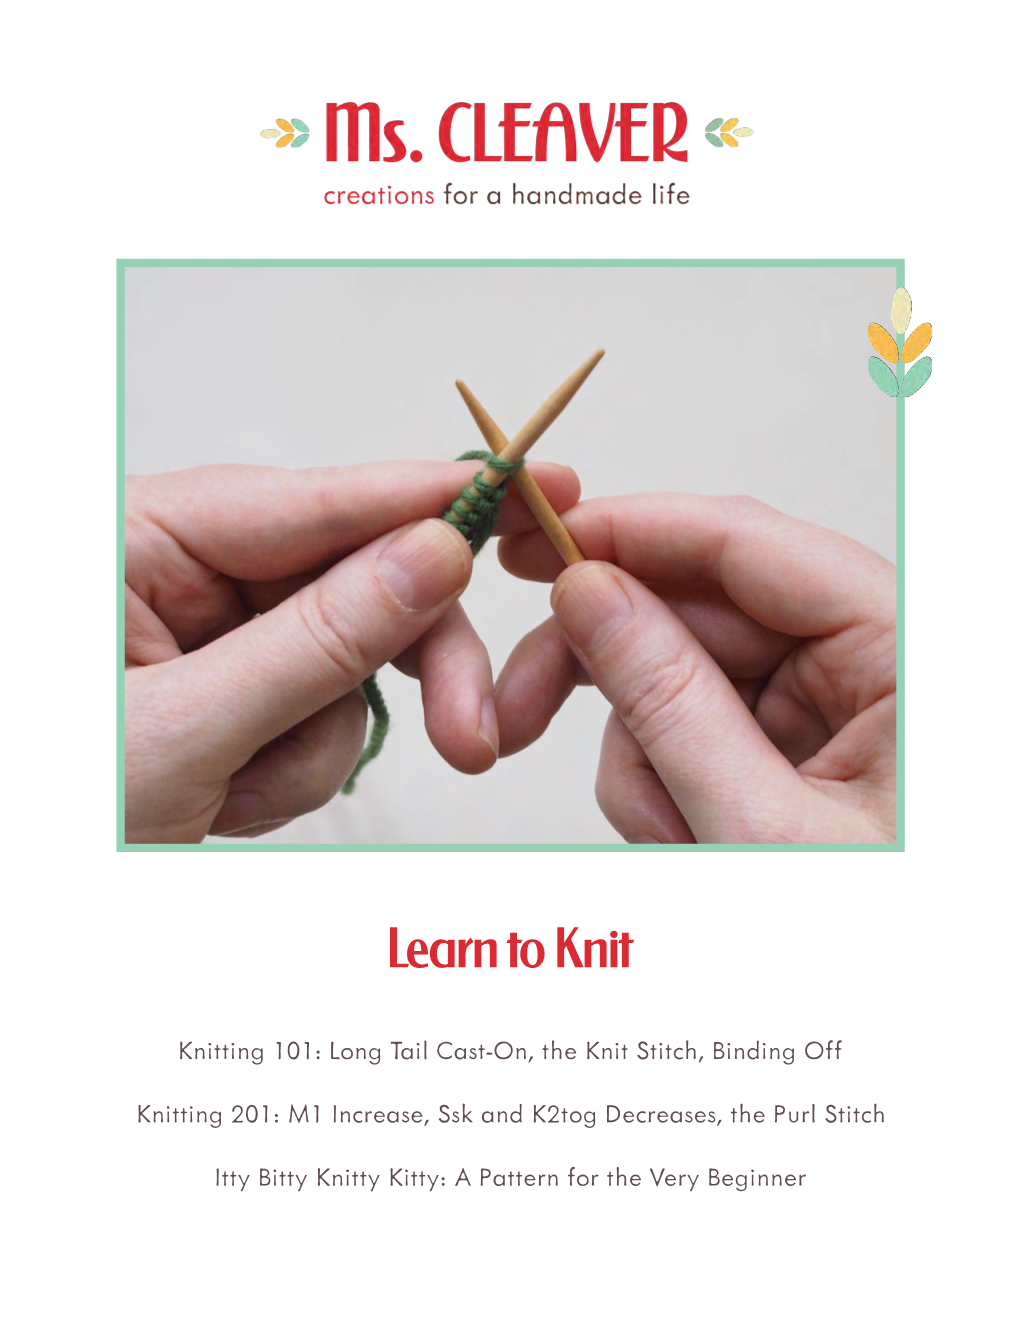 Knitting 101: Long Tail Cast-On, the Knit Stitch, Binding Off